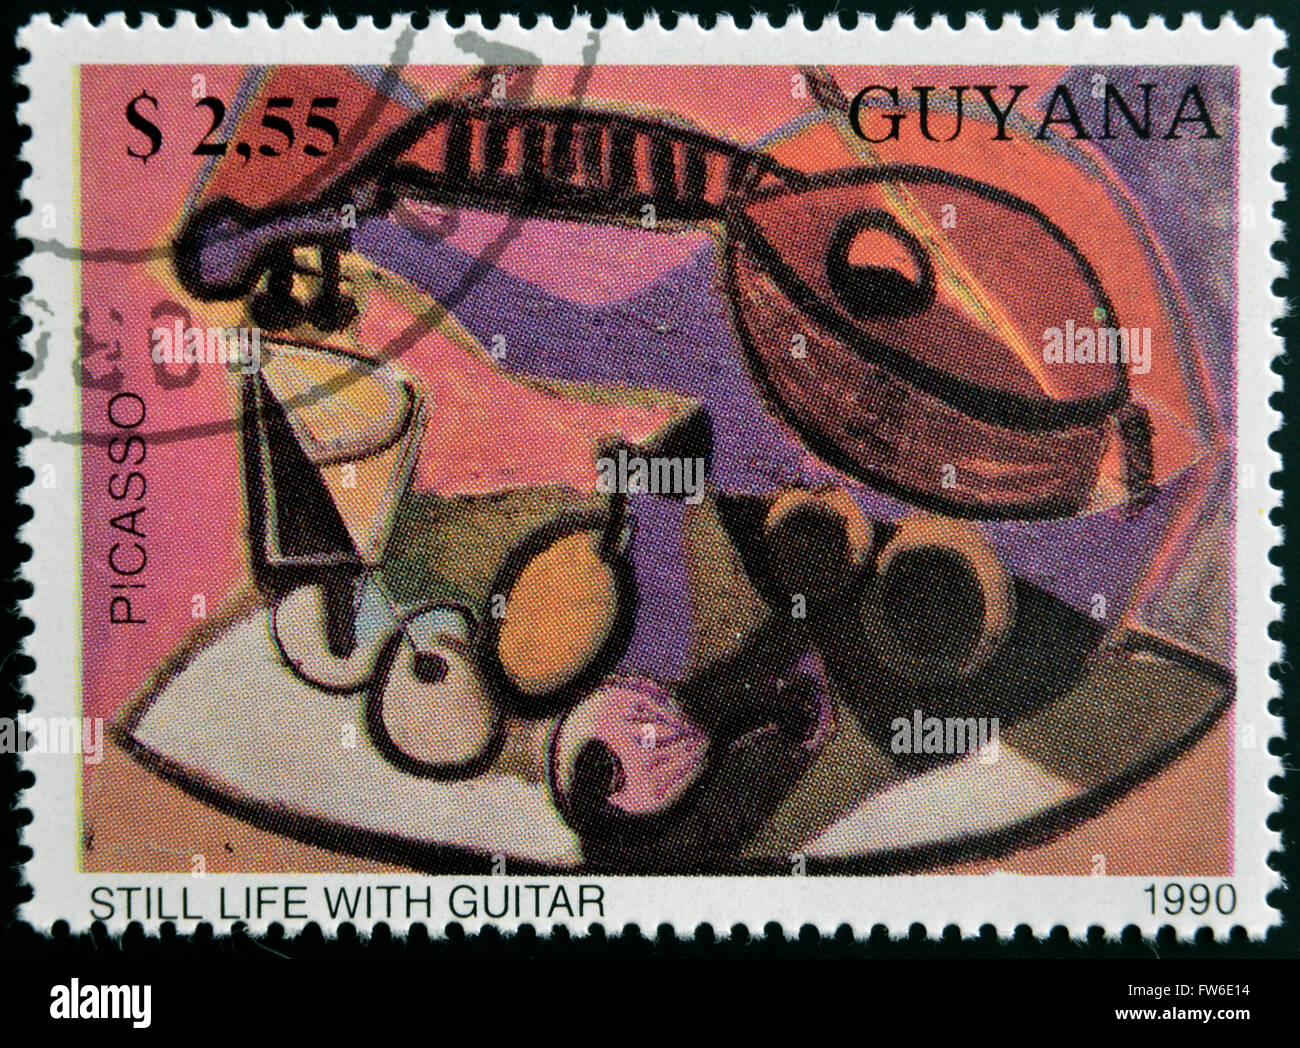 GUYANA - CIRCA 1990: A stamp printed in Guayana shows Still life with guitar by Pablo Picasso, circa 1990 Stock Photo